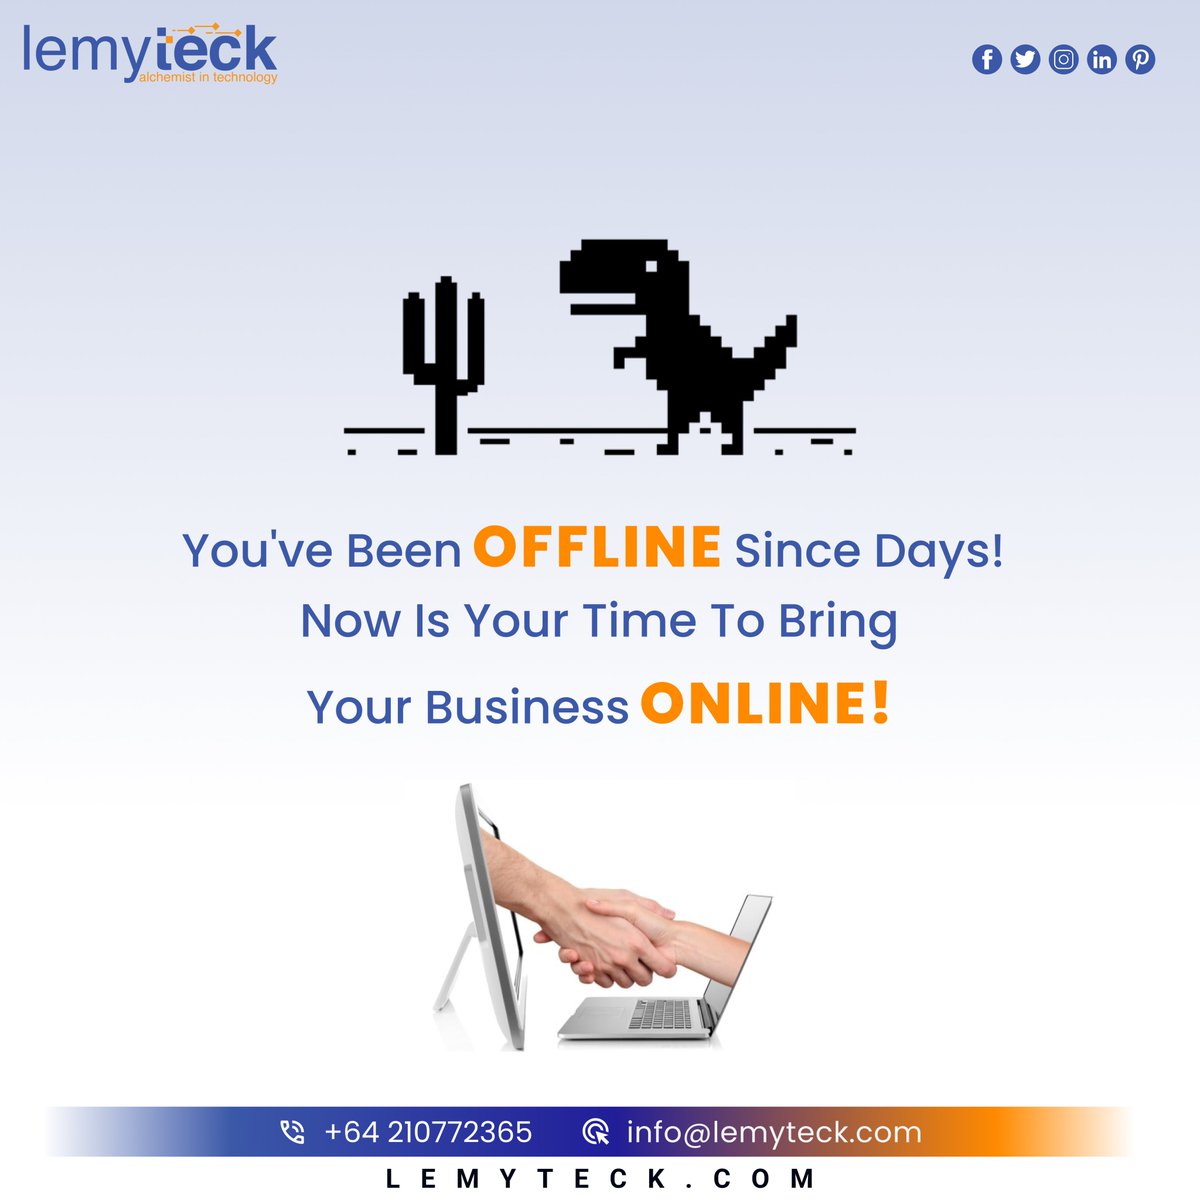 Get expert advice to revamp 🔄your business strategy and improve your online 🚀presence. Connect with your target audience and watch your business grow⏳. Let's work together👥 to alter your brand's presence! #lemyteck #RevampNZStrategy #DigitalNZ #NZOnlinePresence #ConnectNZ